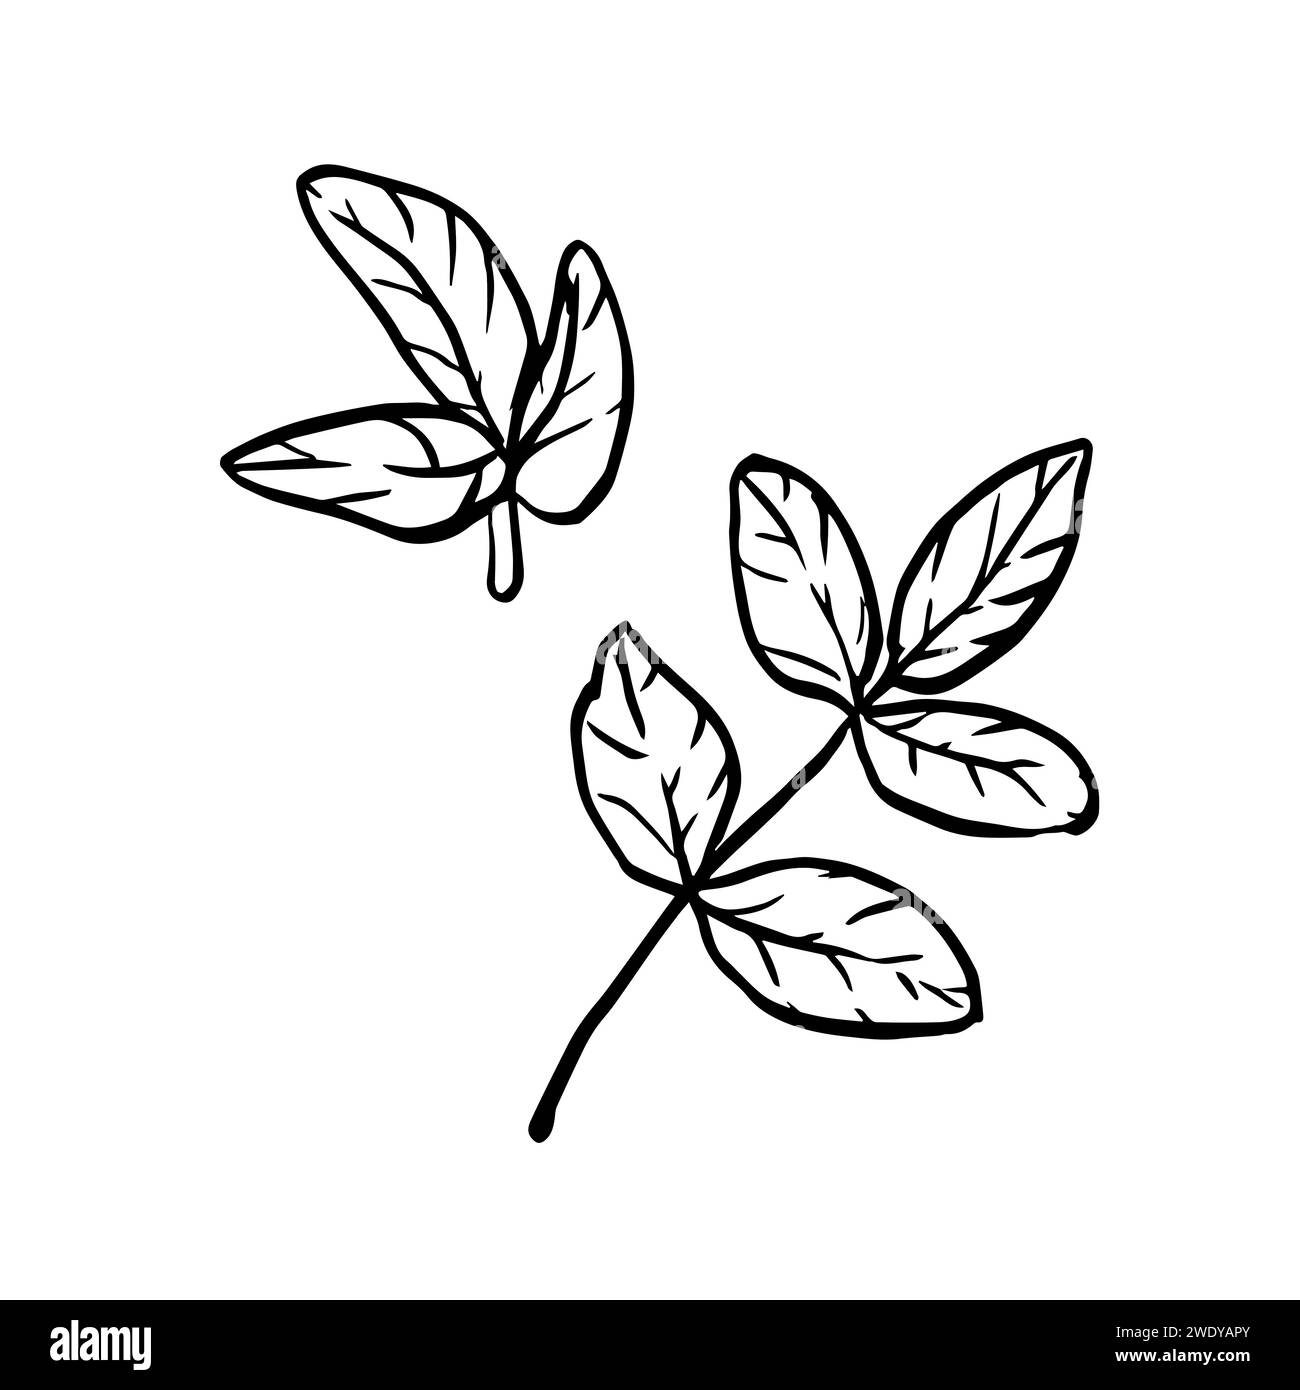 Vector black line contour rose hip leaves, hand drawn floral graphic illustration isolated on a white background. Clip art wild rose for the design, p Stock Vector